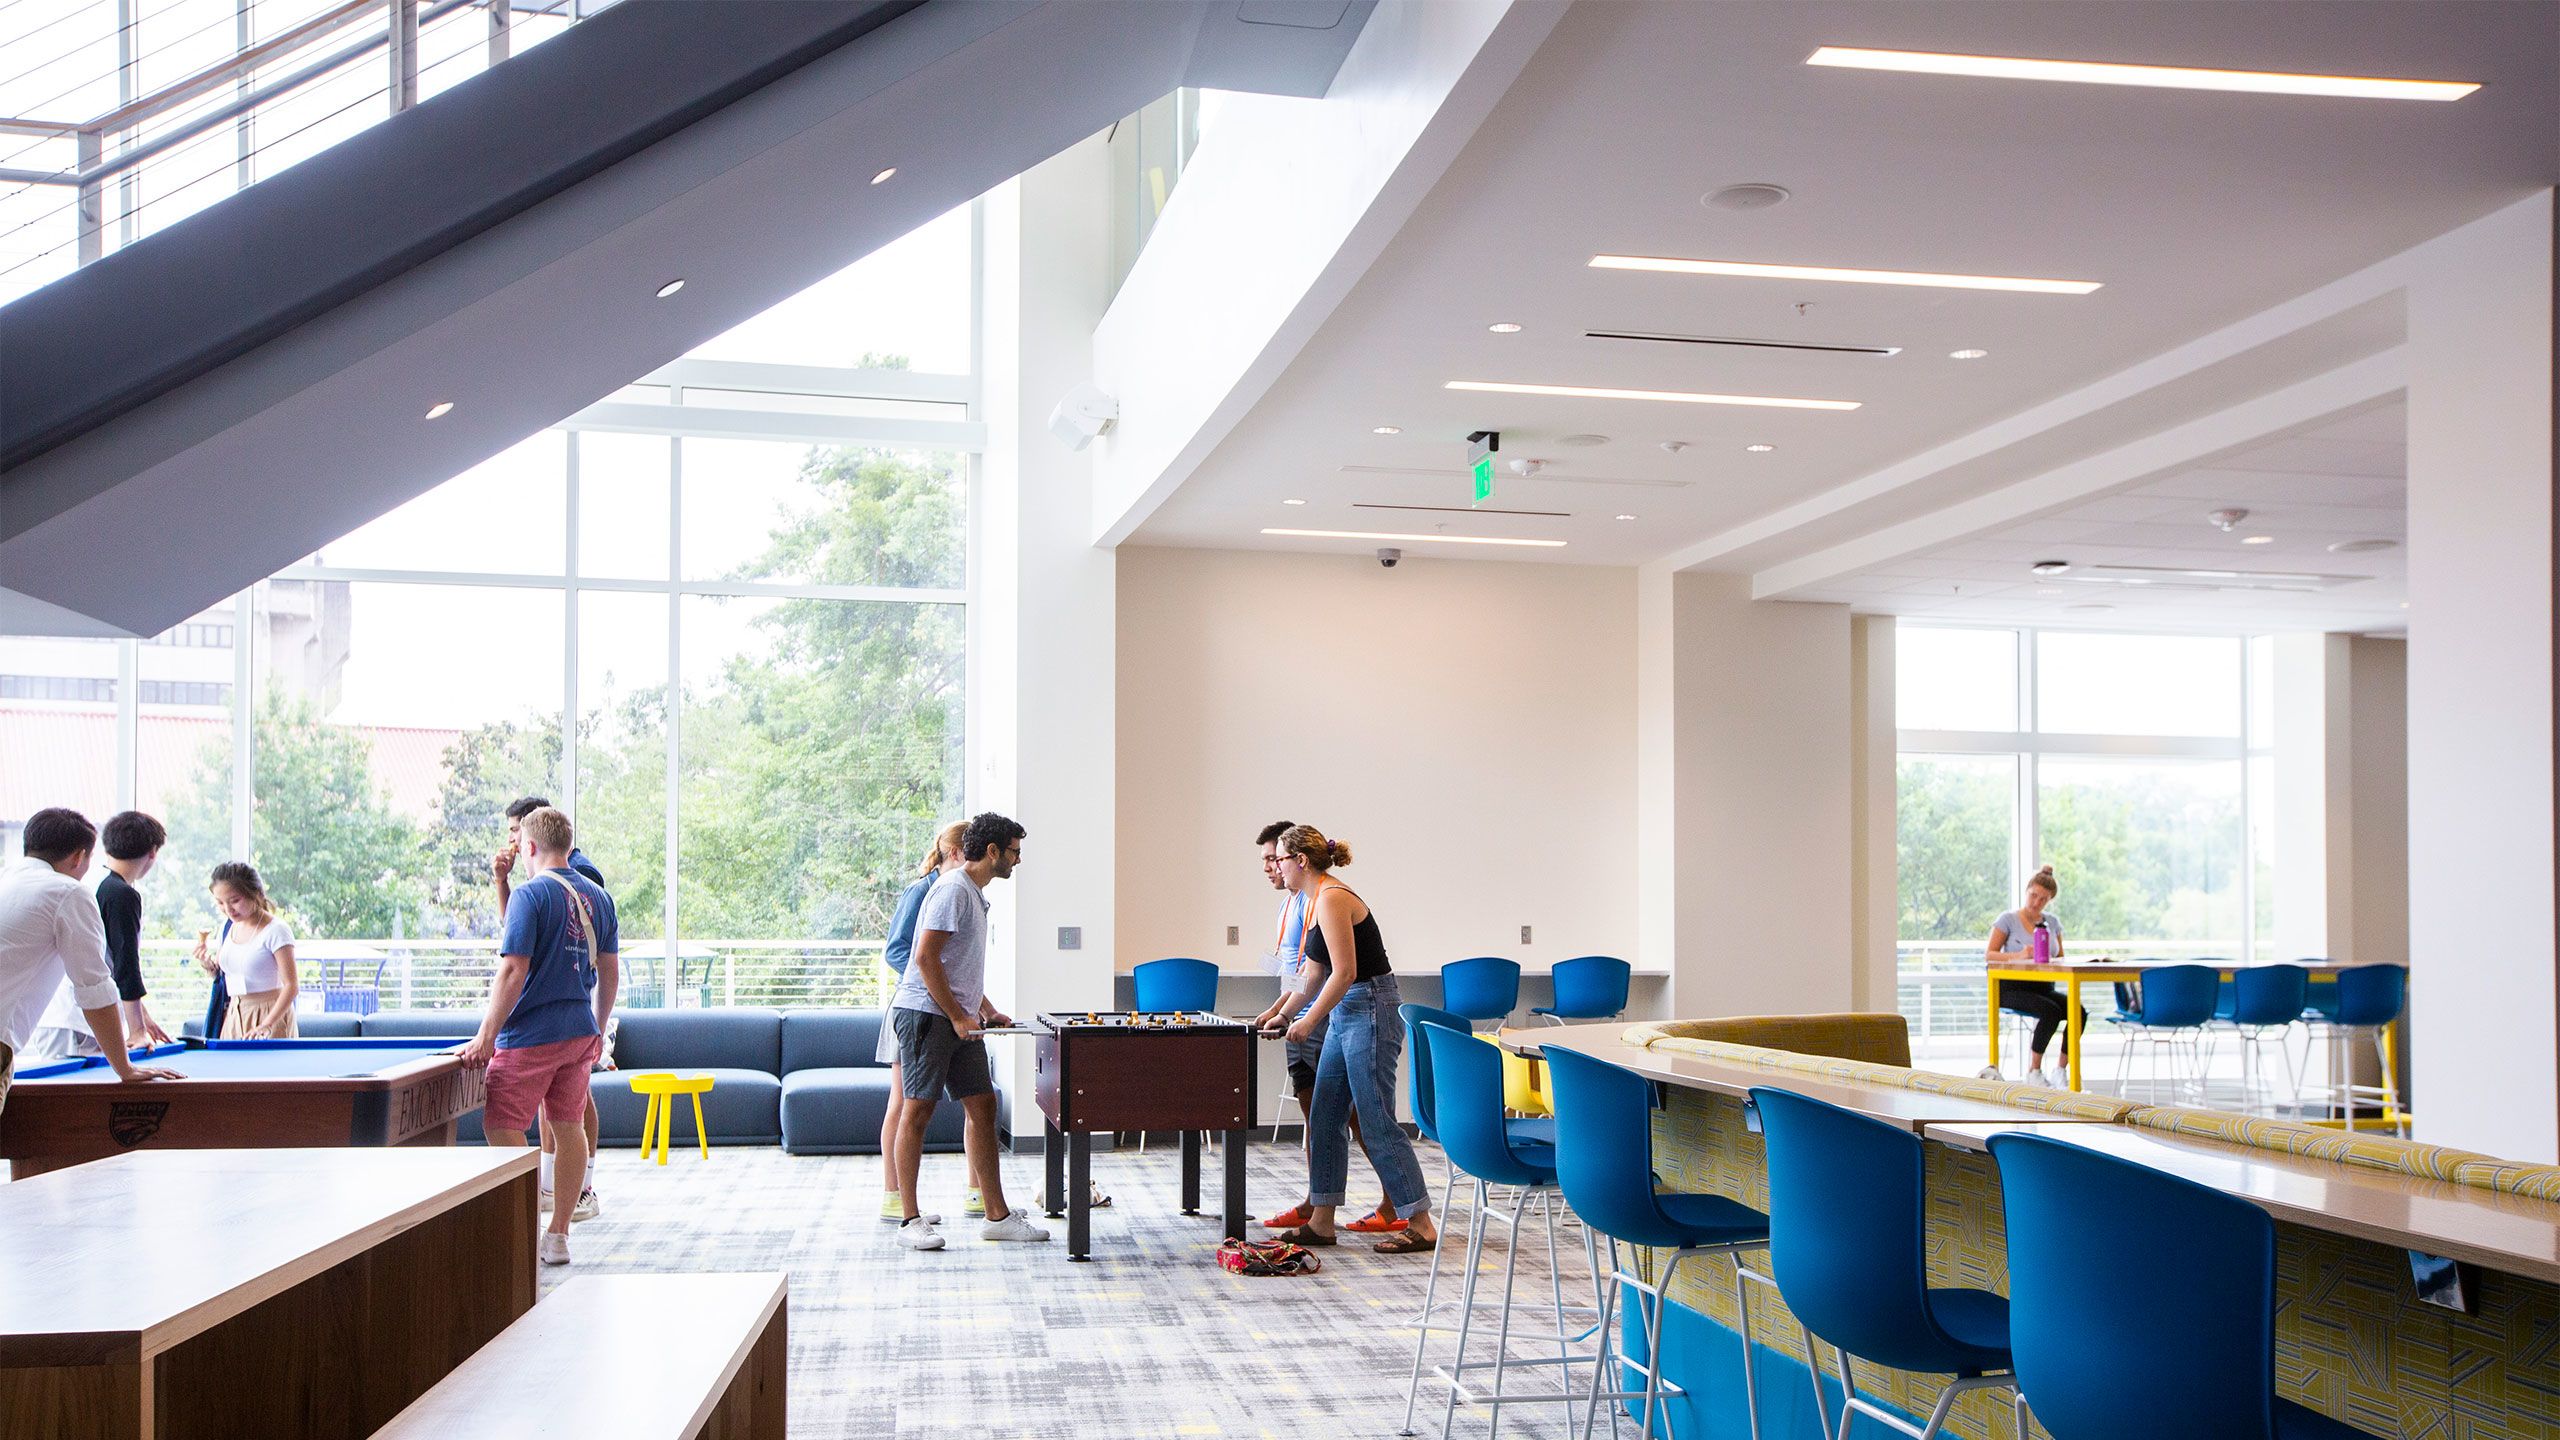 Emory University: Emory Student Center -- Spaces4Learning